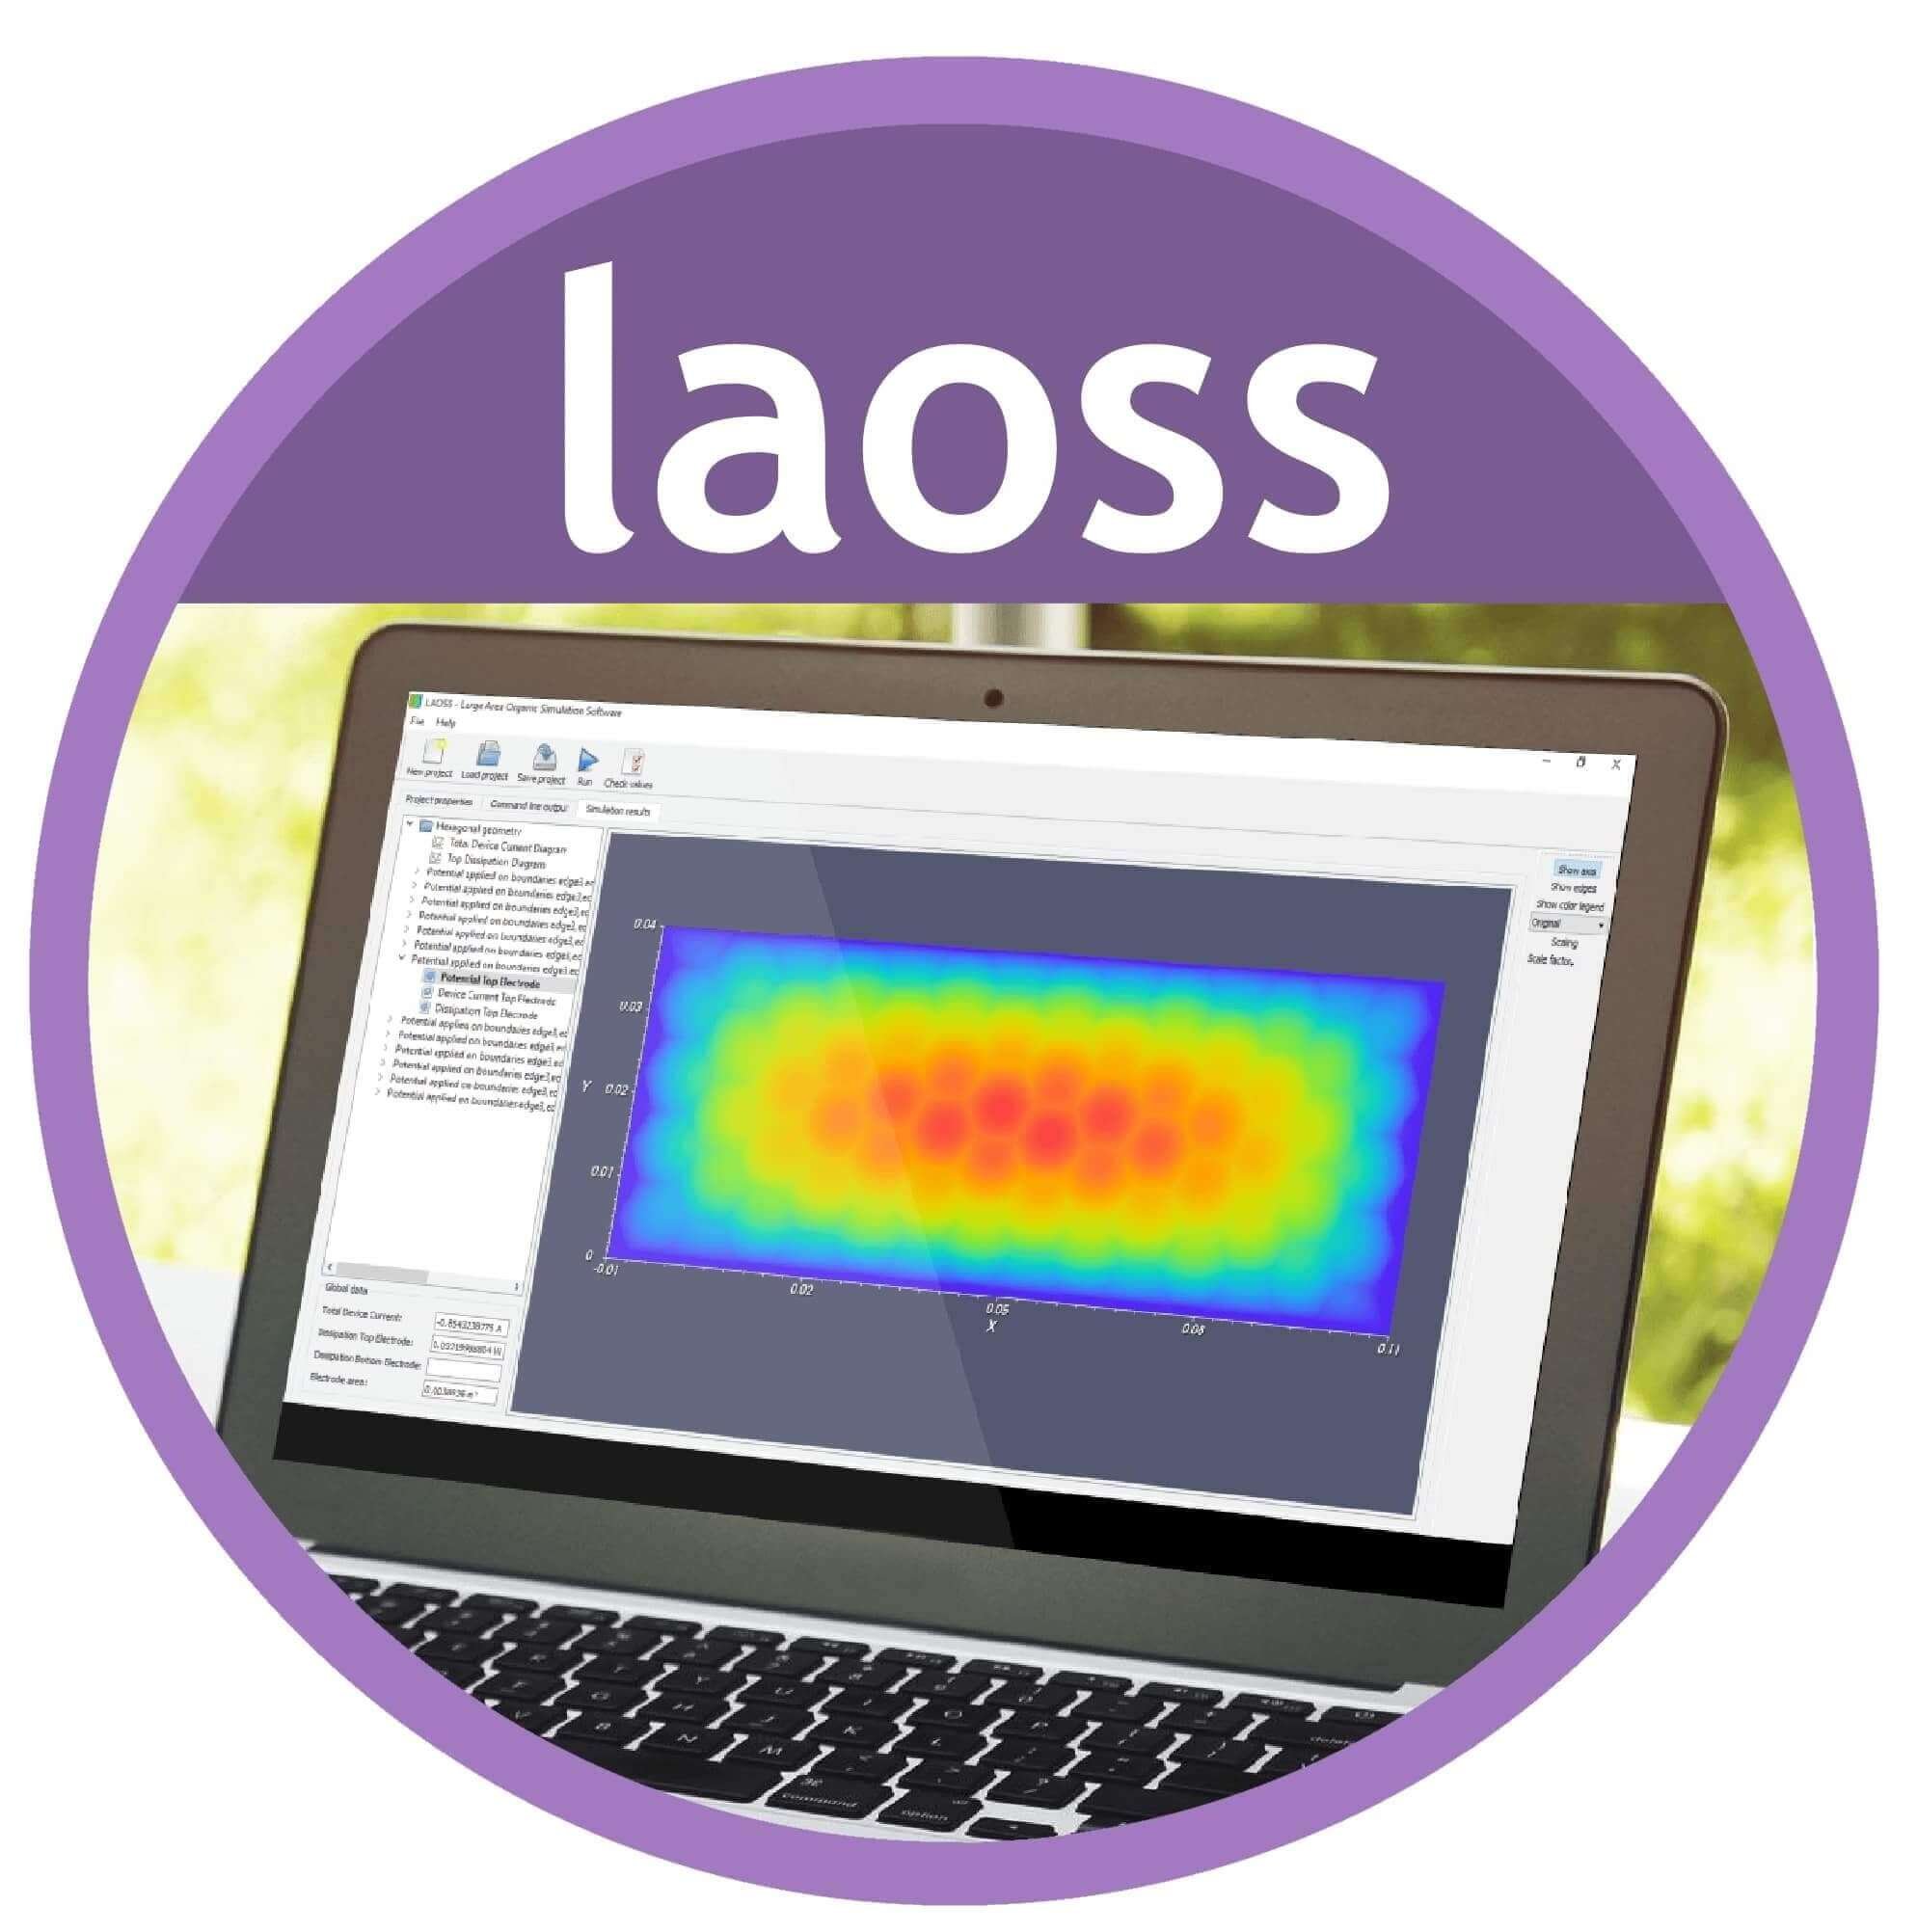 Laoss - Simulation of large area OLEDs and solar cells for upscaling